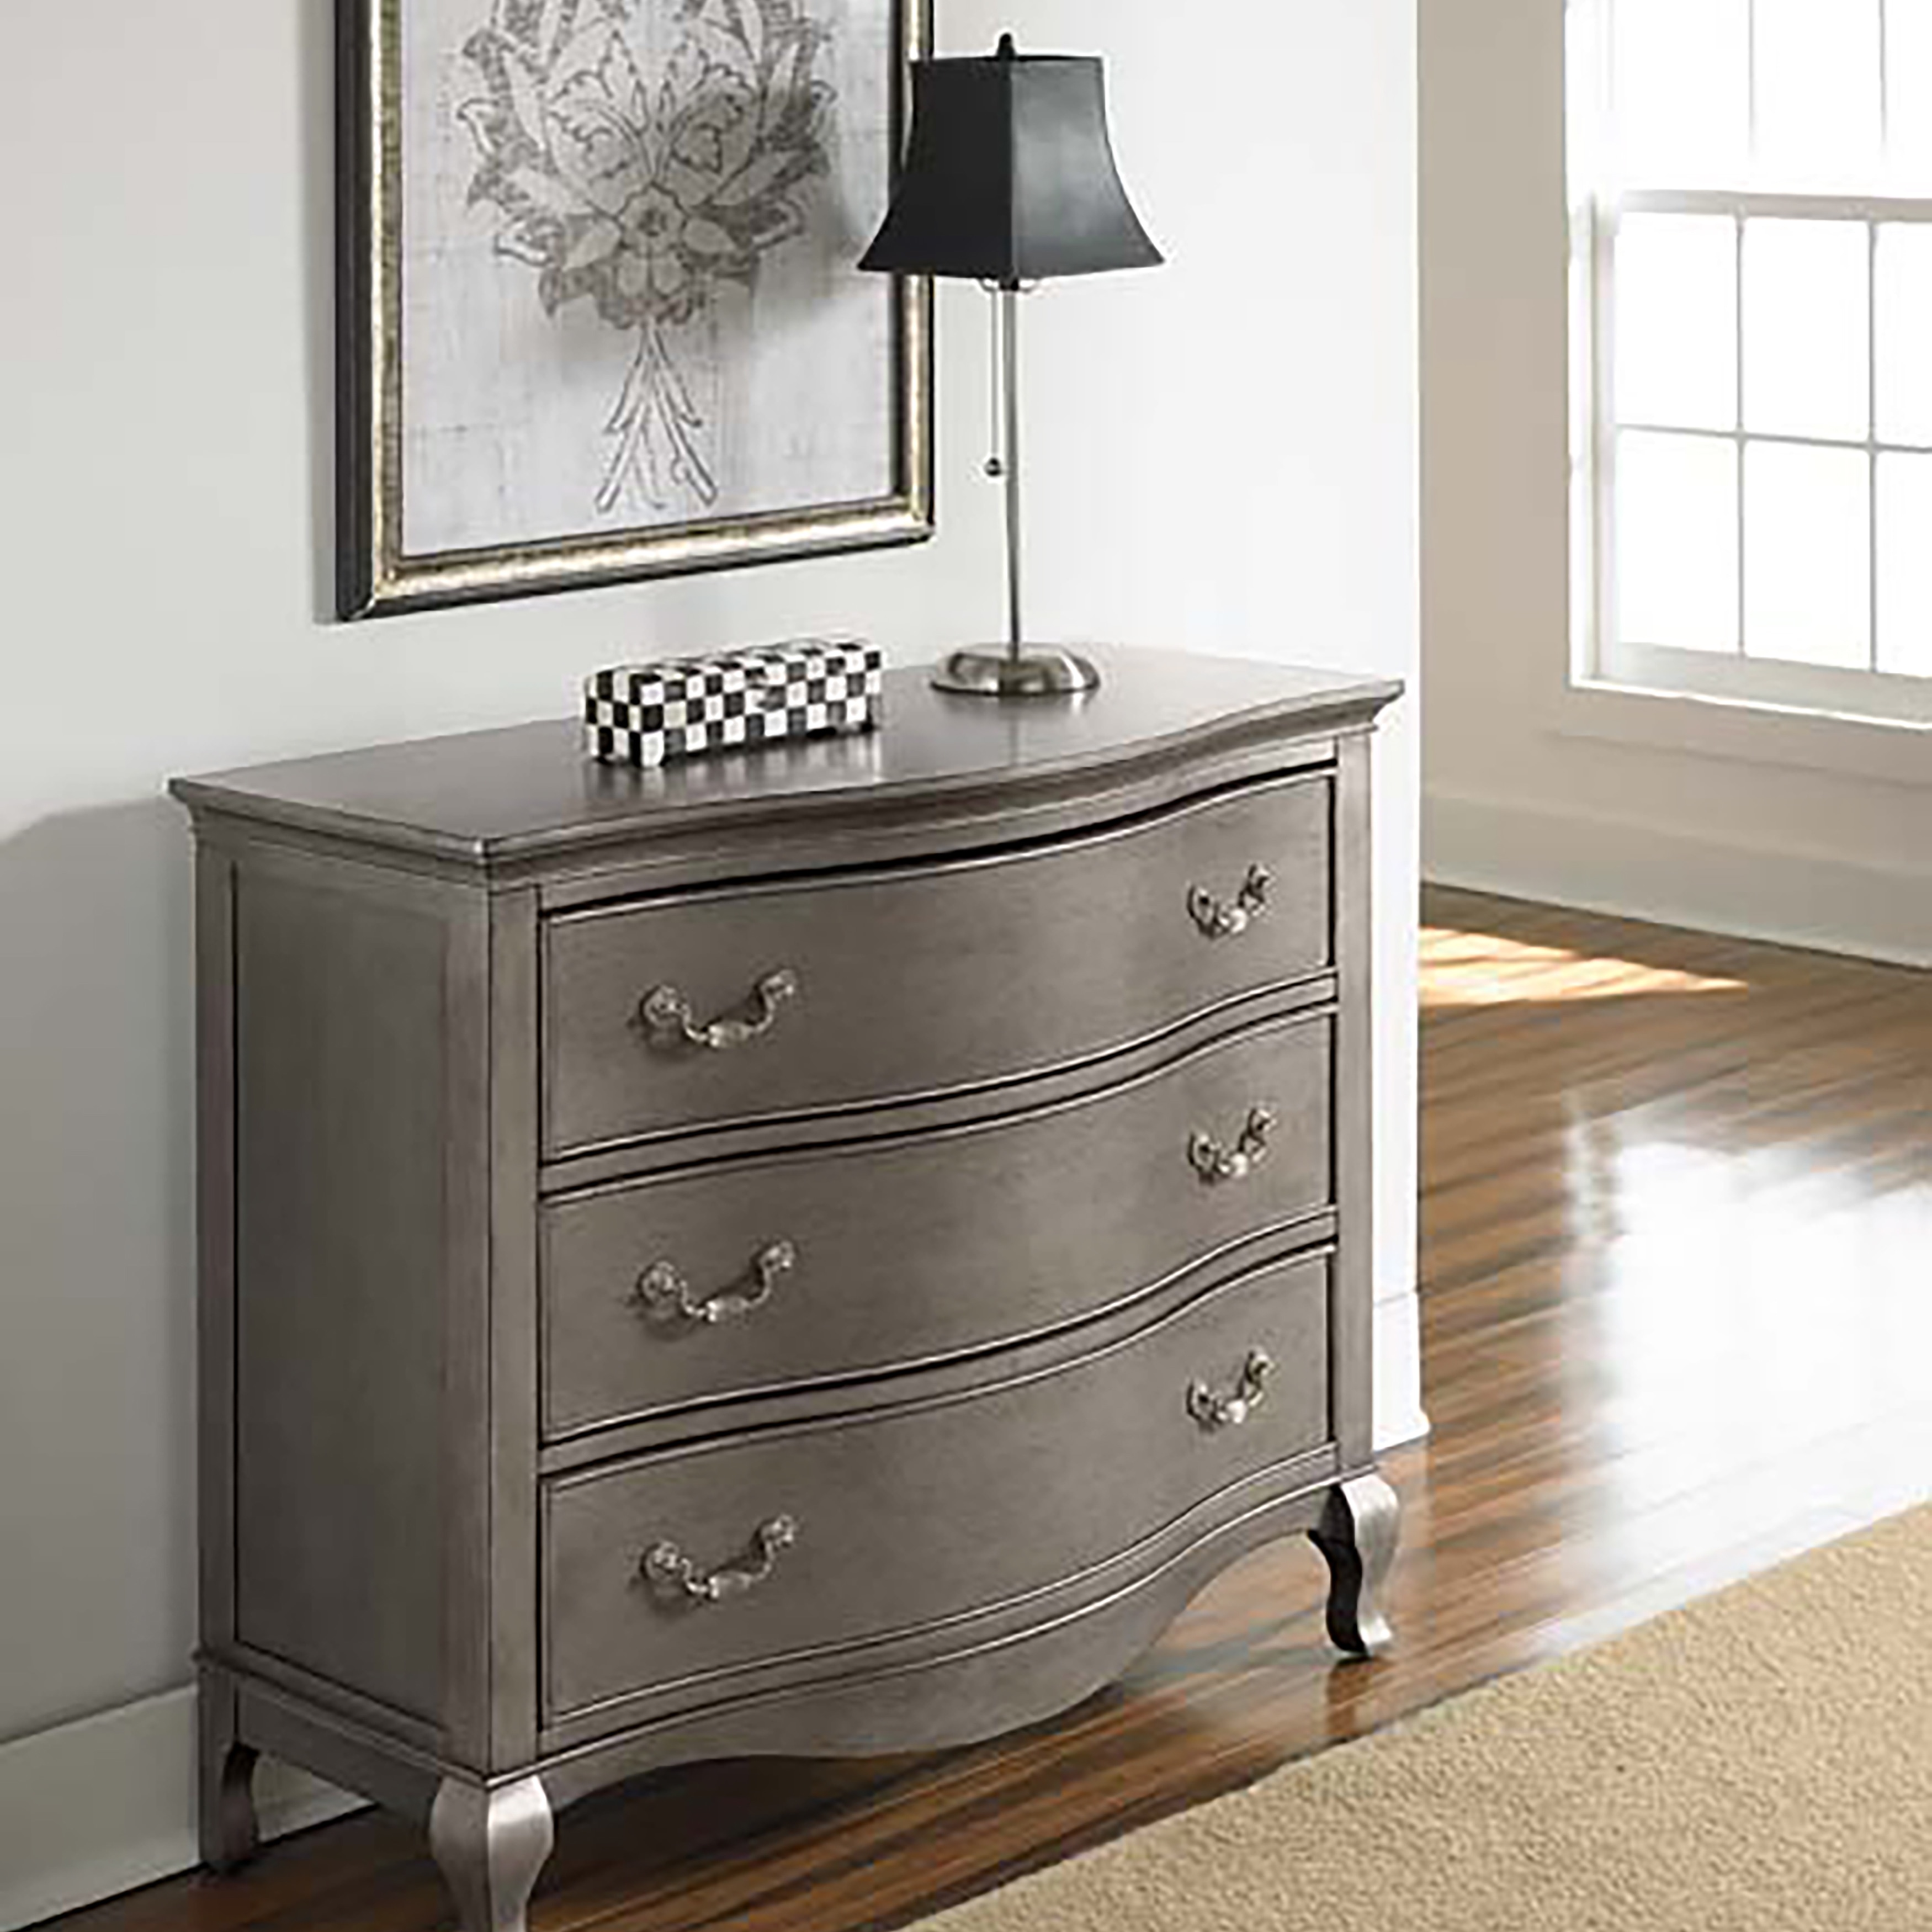 Shop Kensignton Antique Silver 3drawer Dresser Free Shipping Today